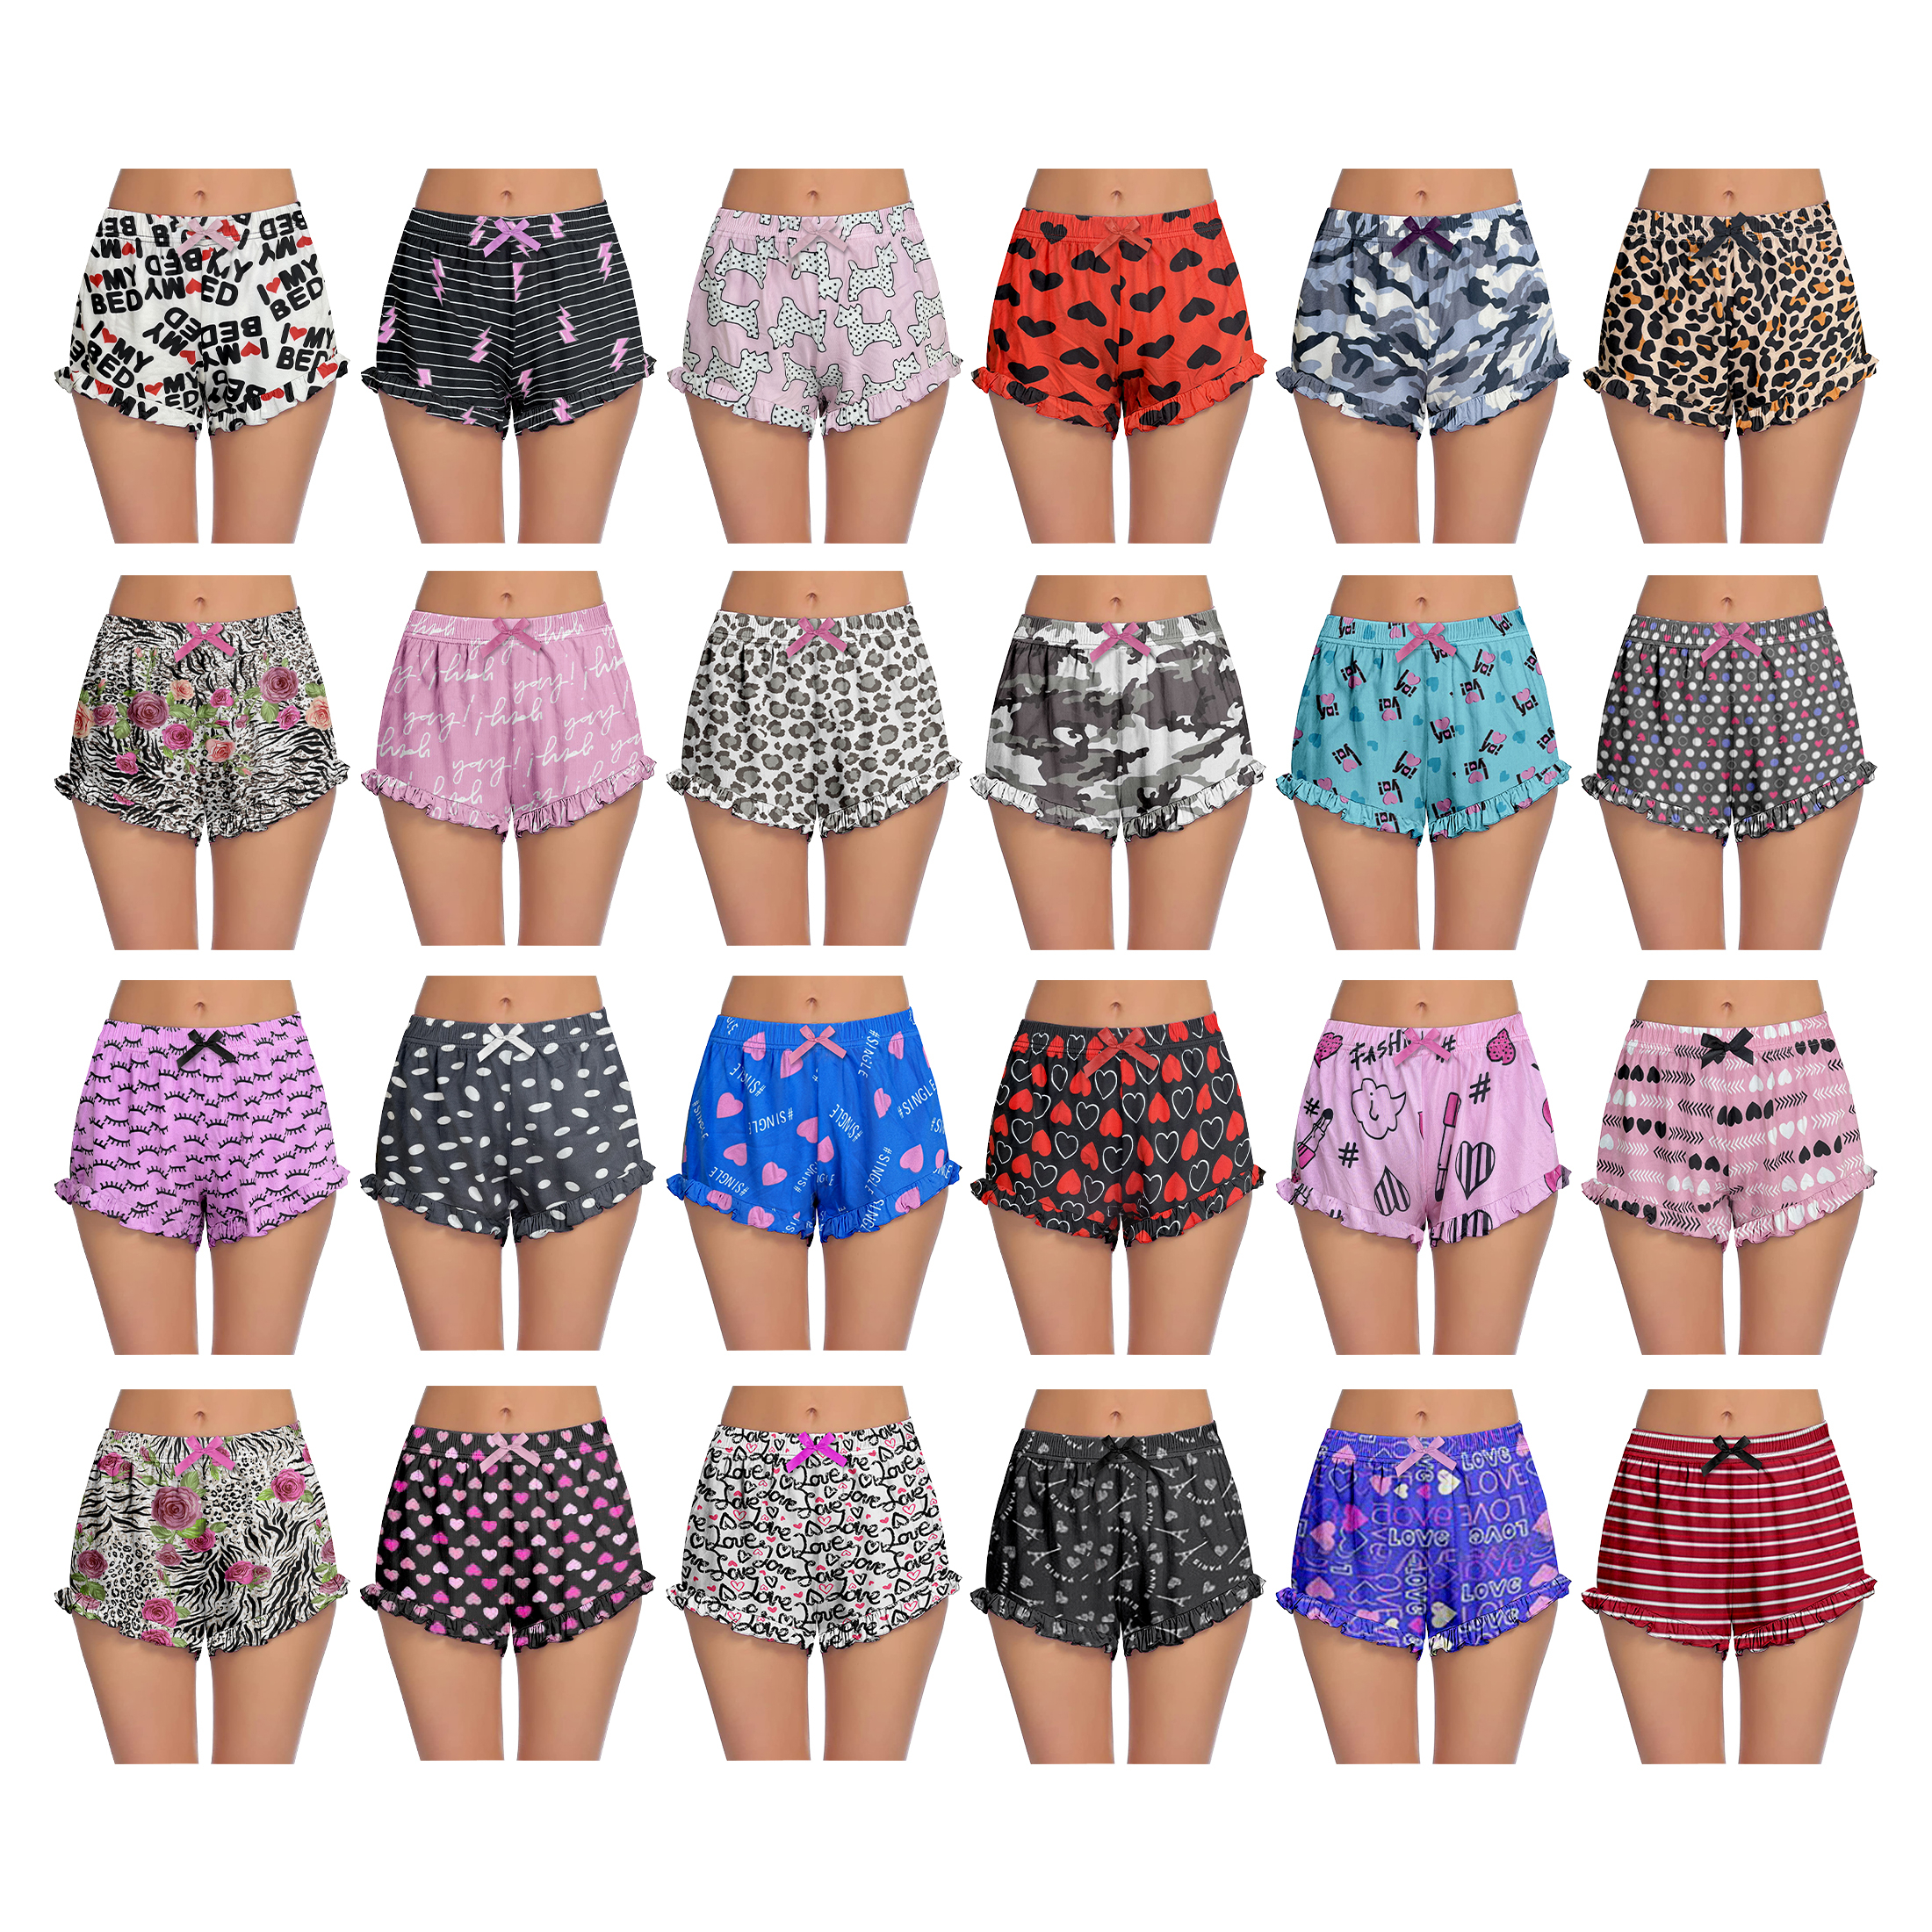 6-Pack Women's Casual Printed Pajama Shorts Soft Stretchy Relaxed Fit Ladies Summer Yoga Bottoms - XL